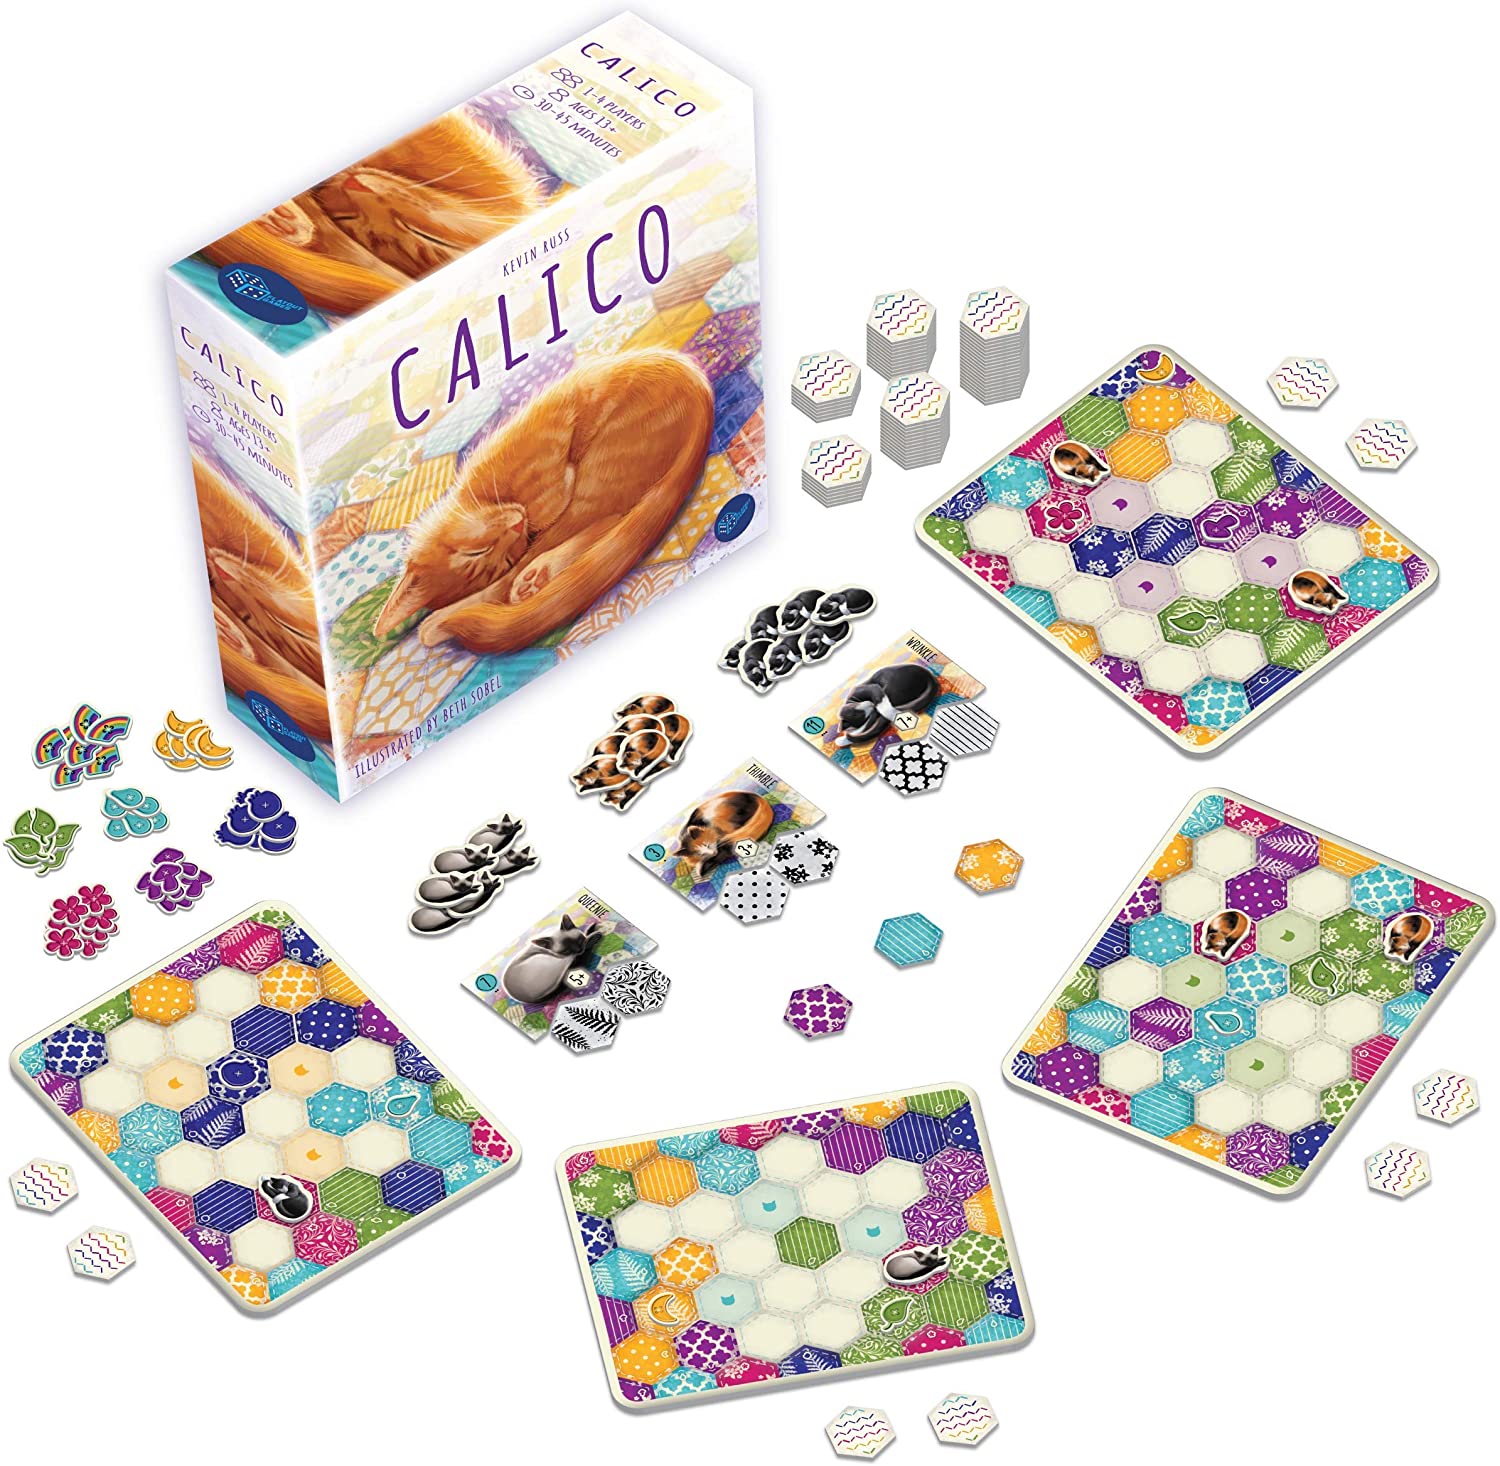 Find out about Calico